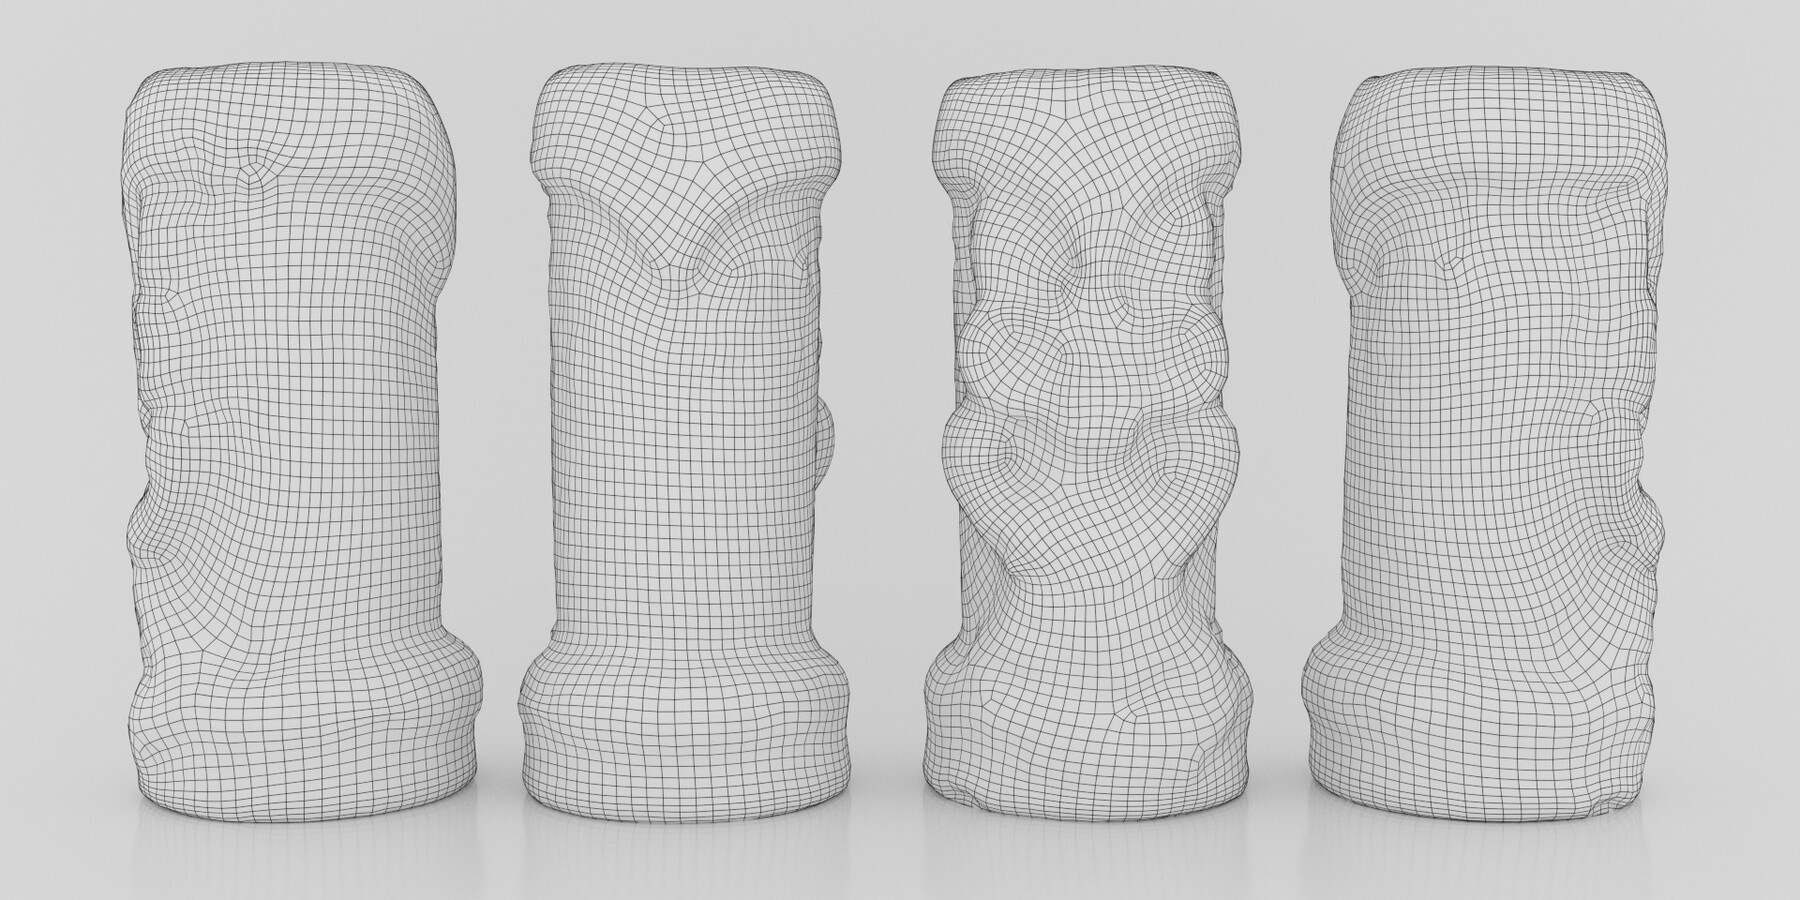 ArtStation - Tiki Cup Glass | Resources